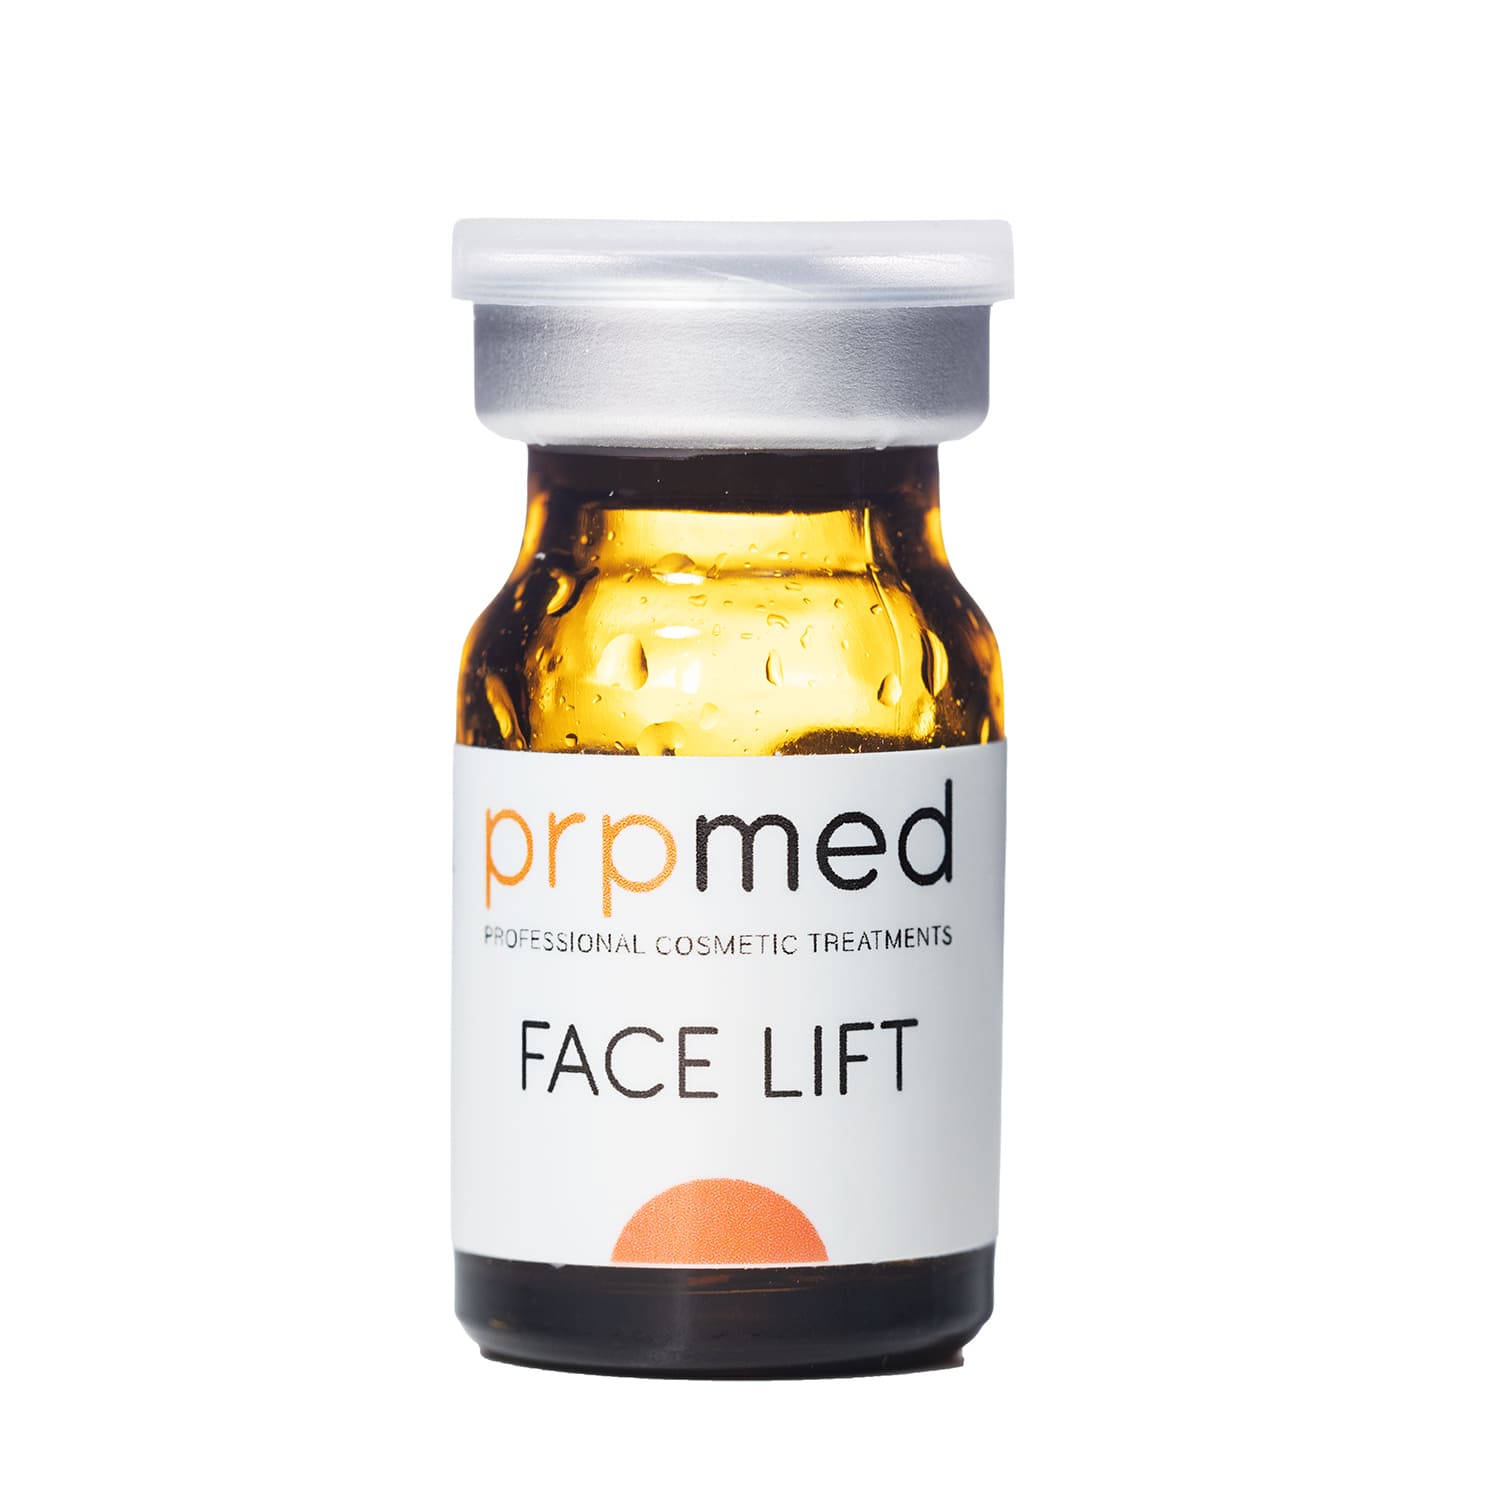 Lifting Facial Microneedling Serum by Prpmed Professional Tratamientos Cosméticos